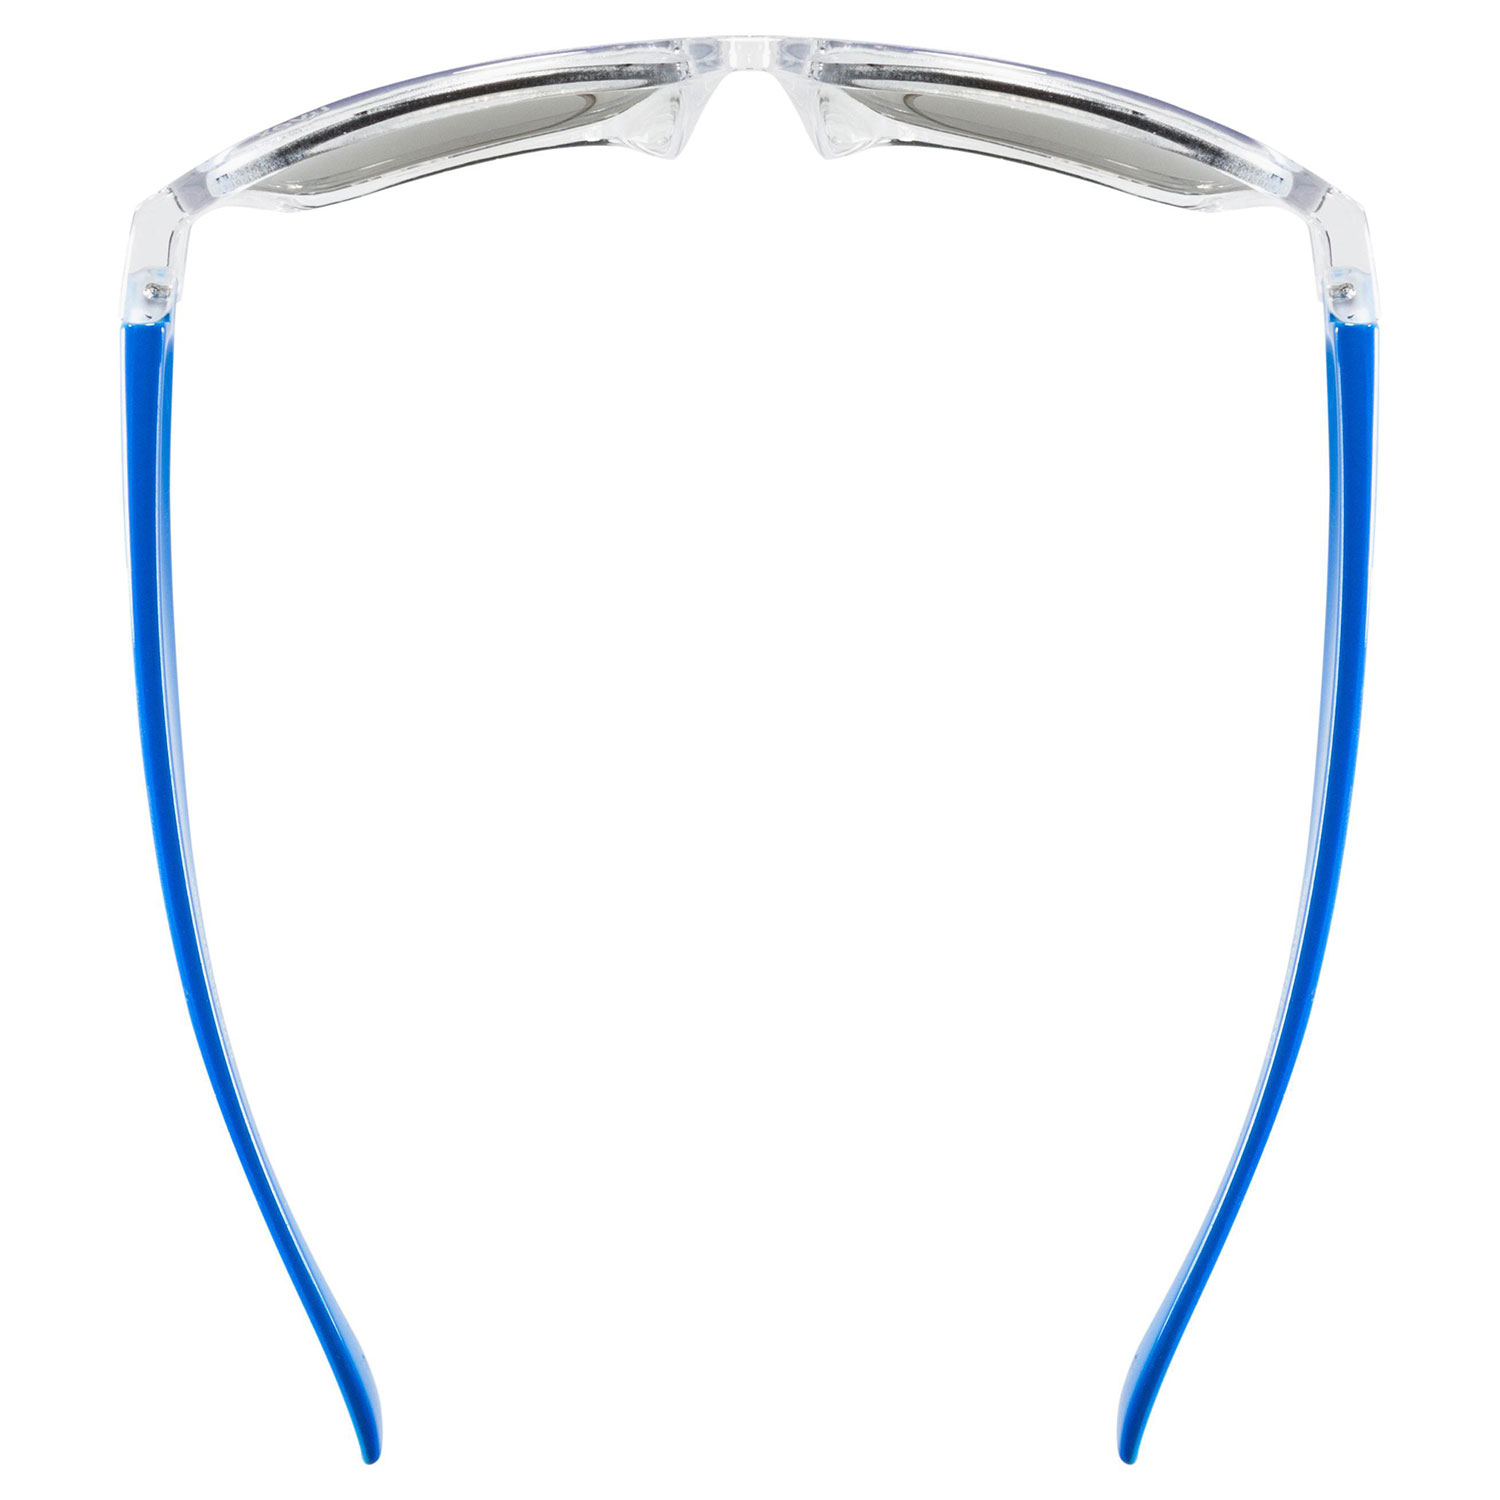 UVEX Sportstyle 508 Clear Blue /mir.blue (s5338959416)